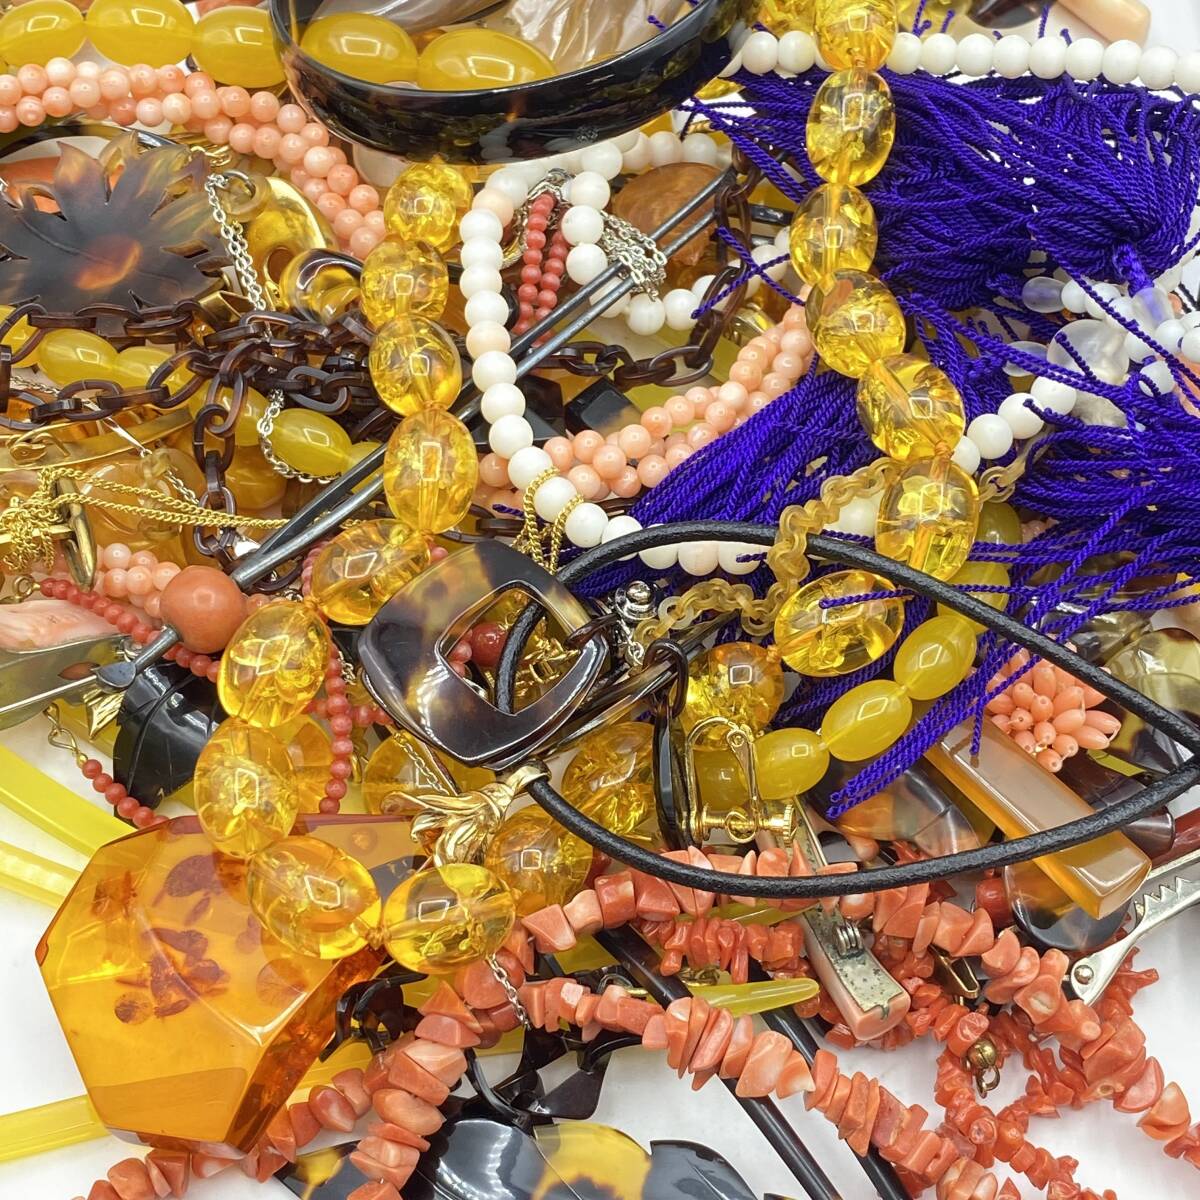 [F27] approximately 1147g tortoise shell / amber /...*. accessory imite-shon coral amber . summarize present condition goods 